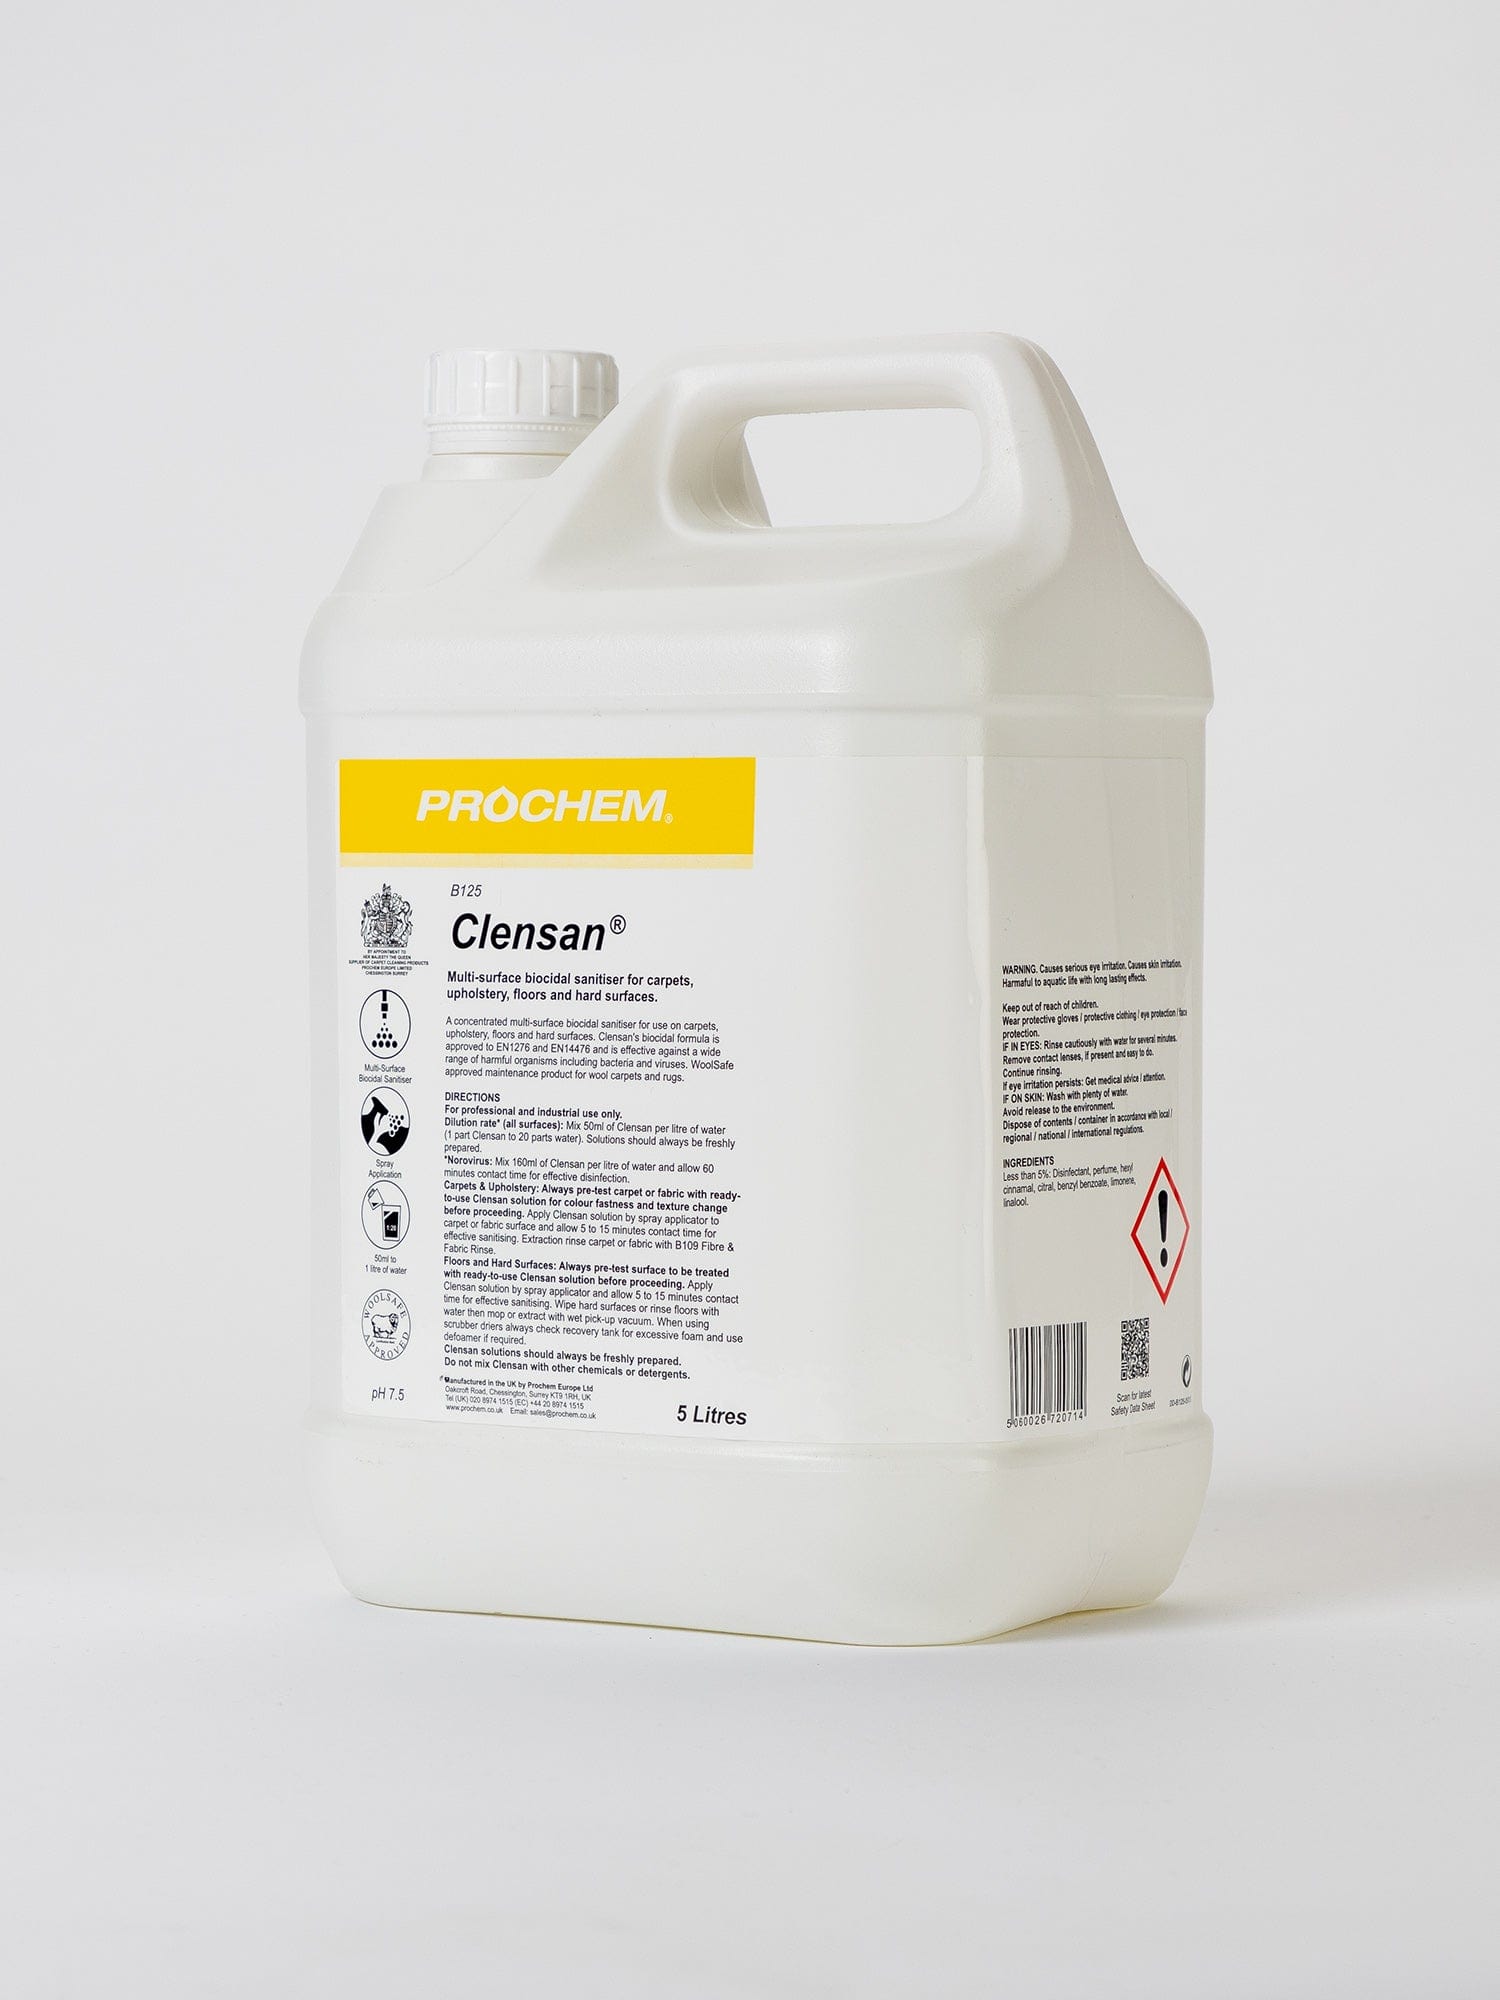 mult surface biocidal cleaner